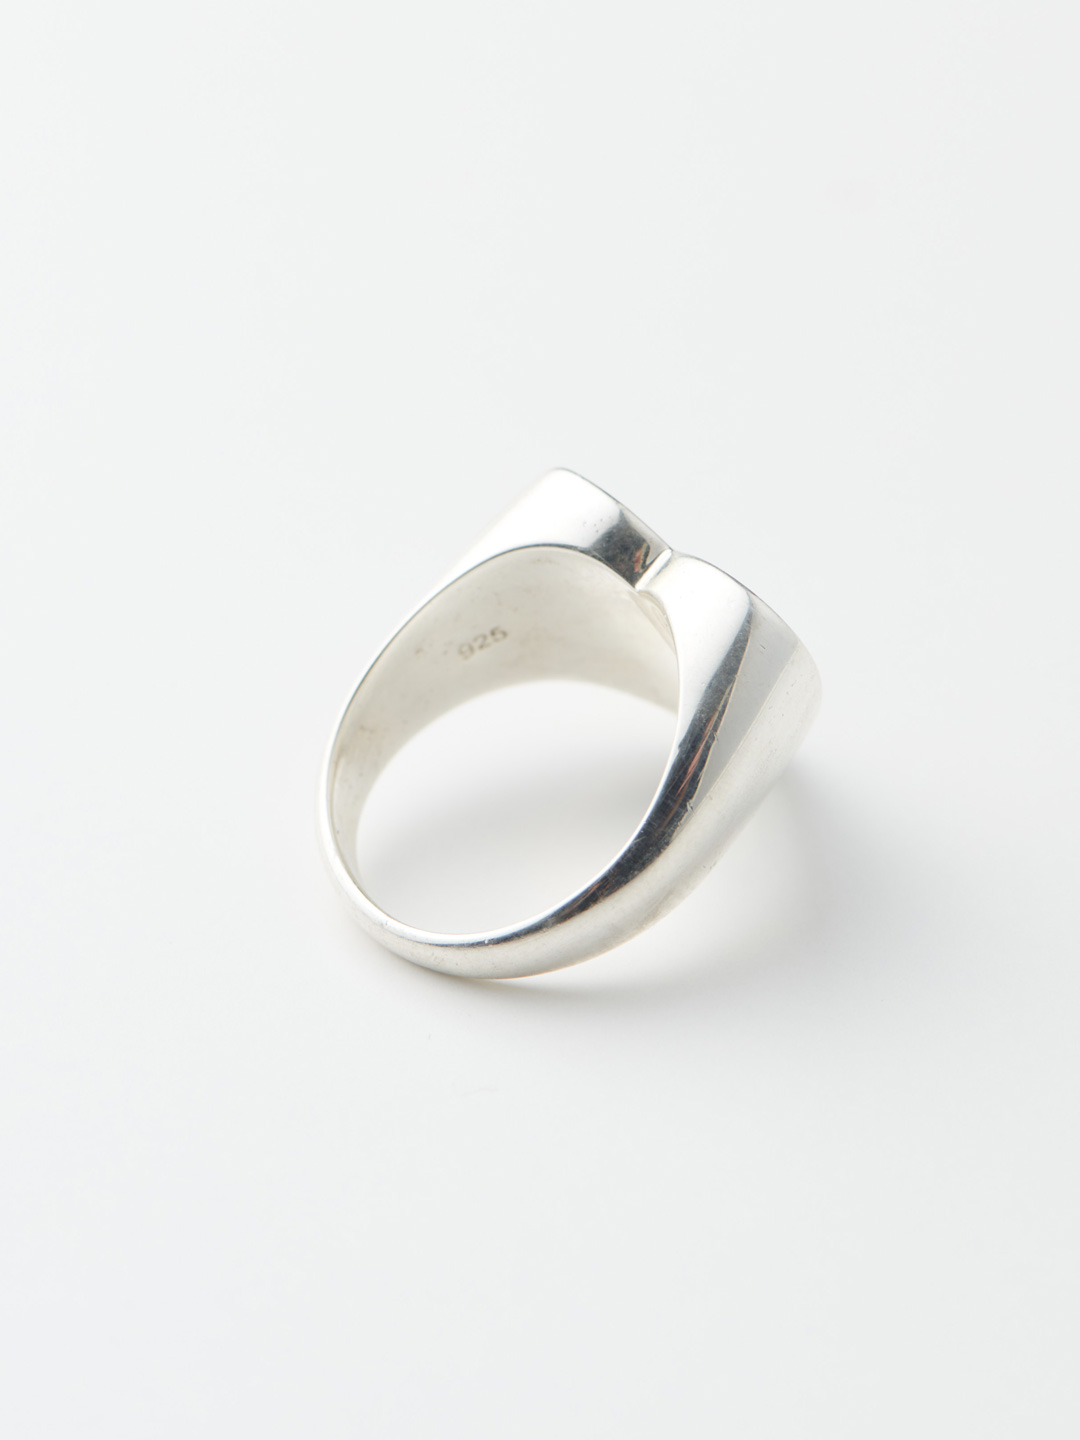 Heart Ring - Silver